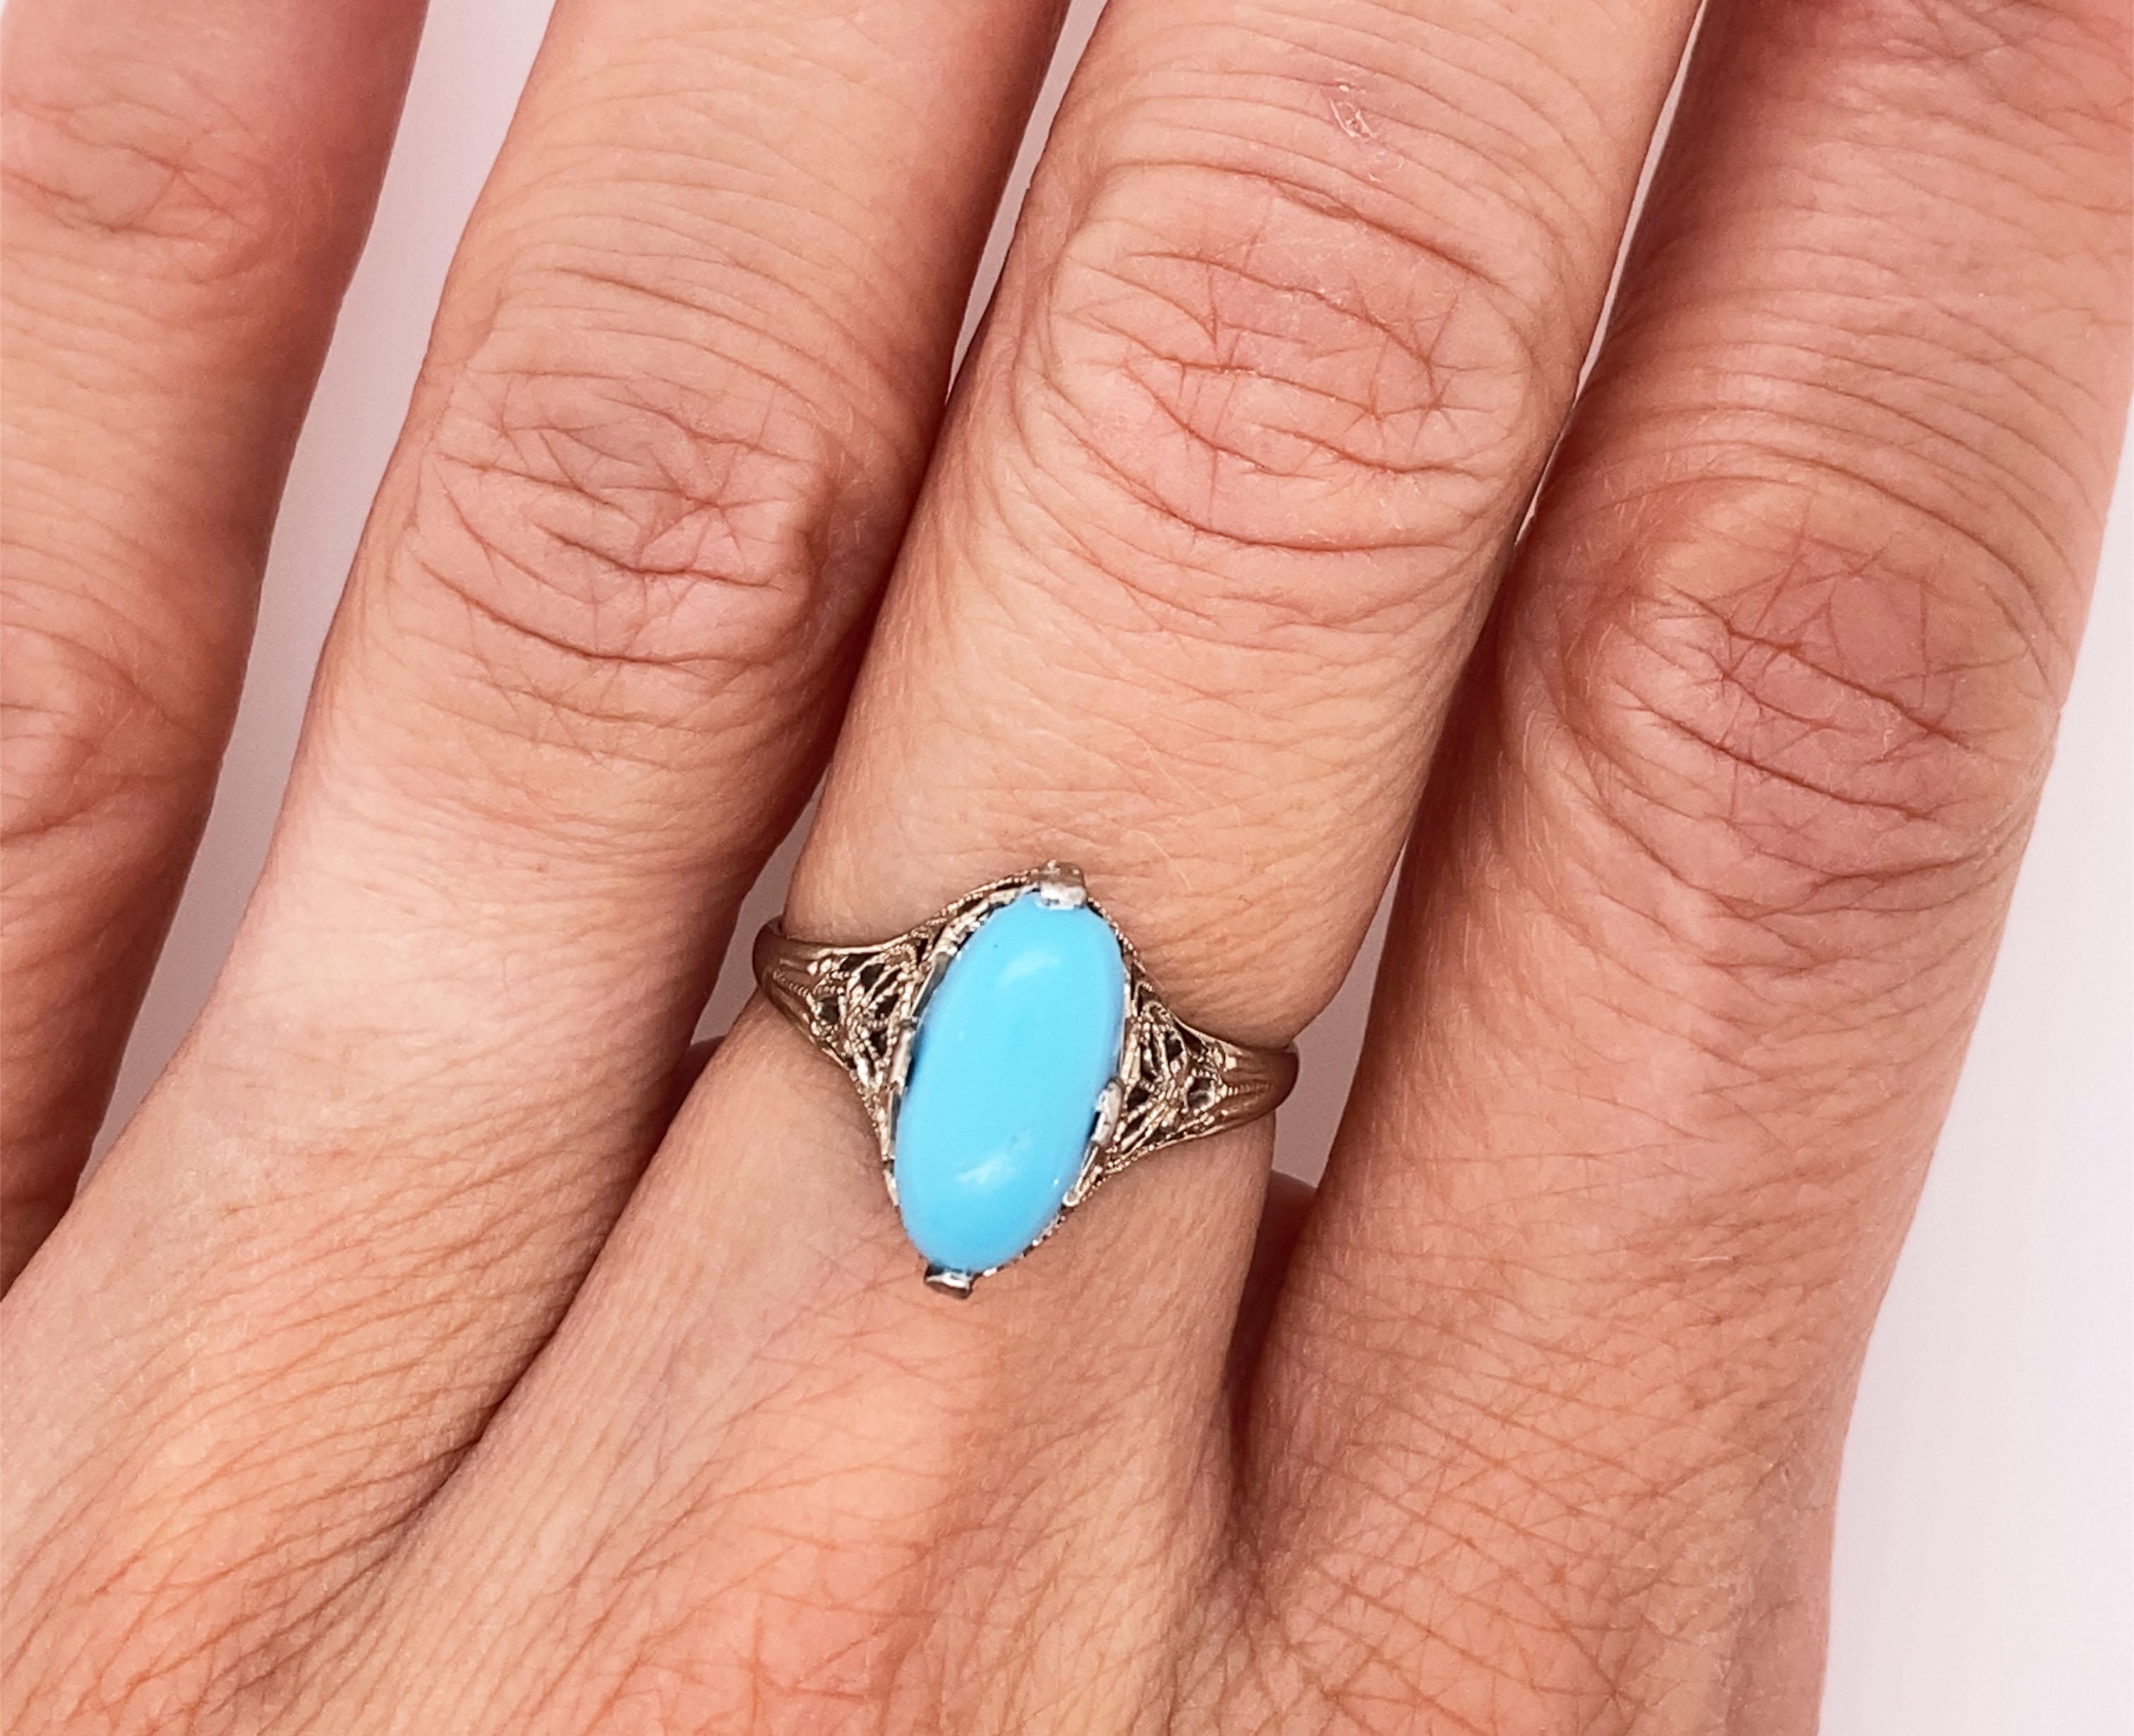 Women's Antique Turquoise Cocktail Statement Ring 14K White Gold Vintage Deco Filigree